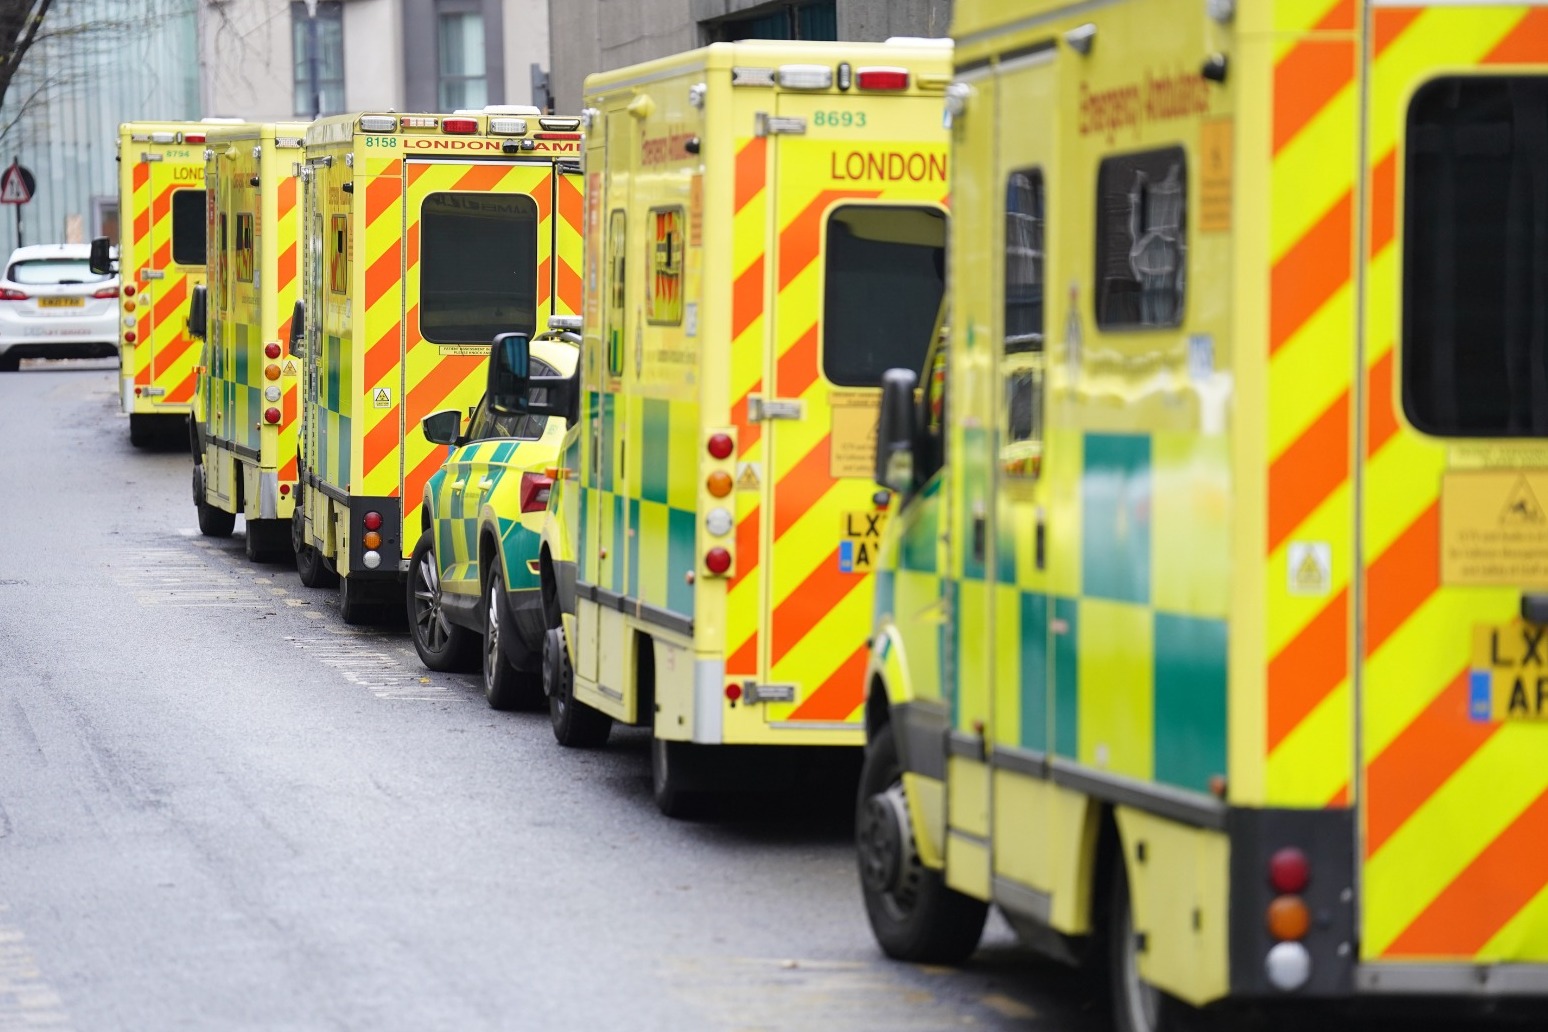 Lib Dems say increasing number of ambulance breakdowns putting patients at risk 